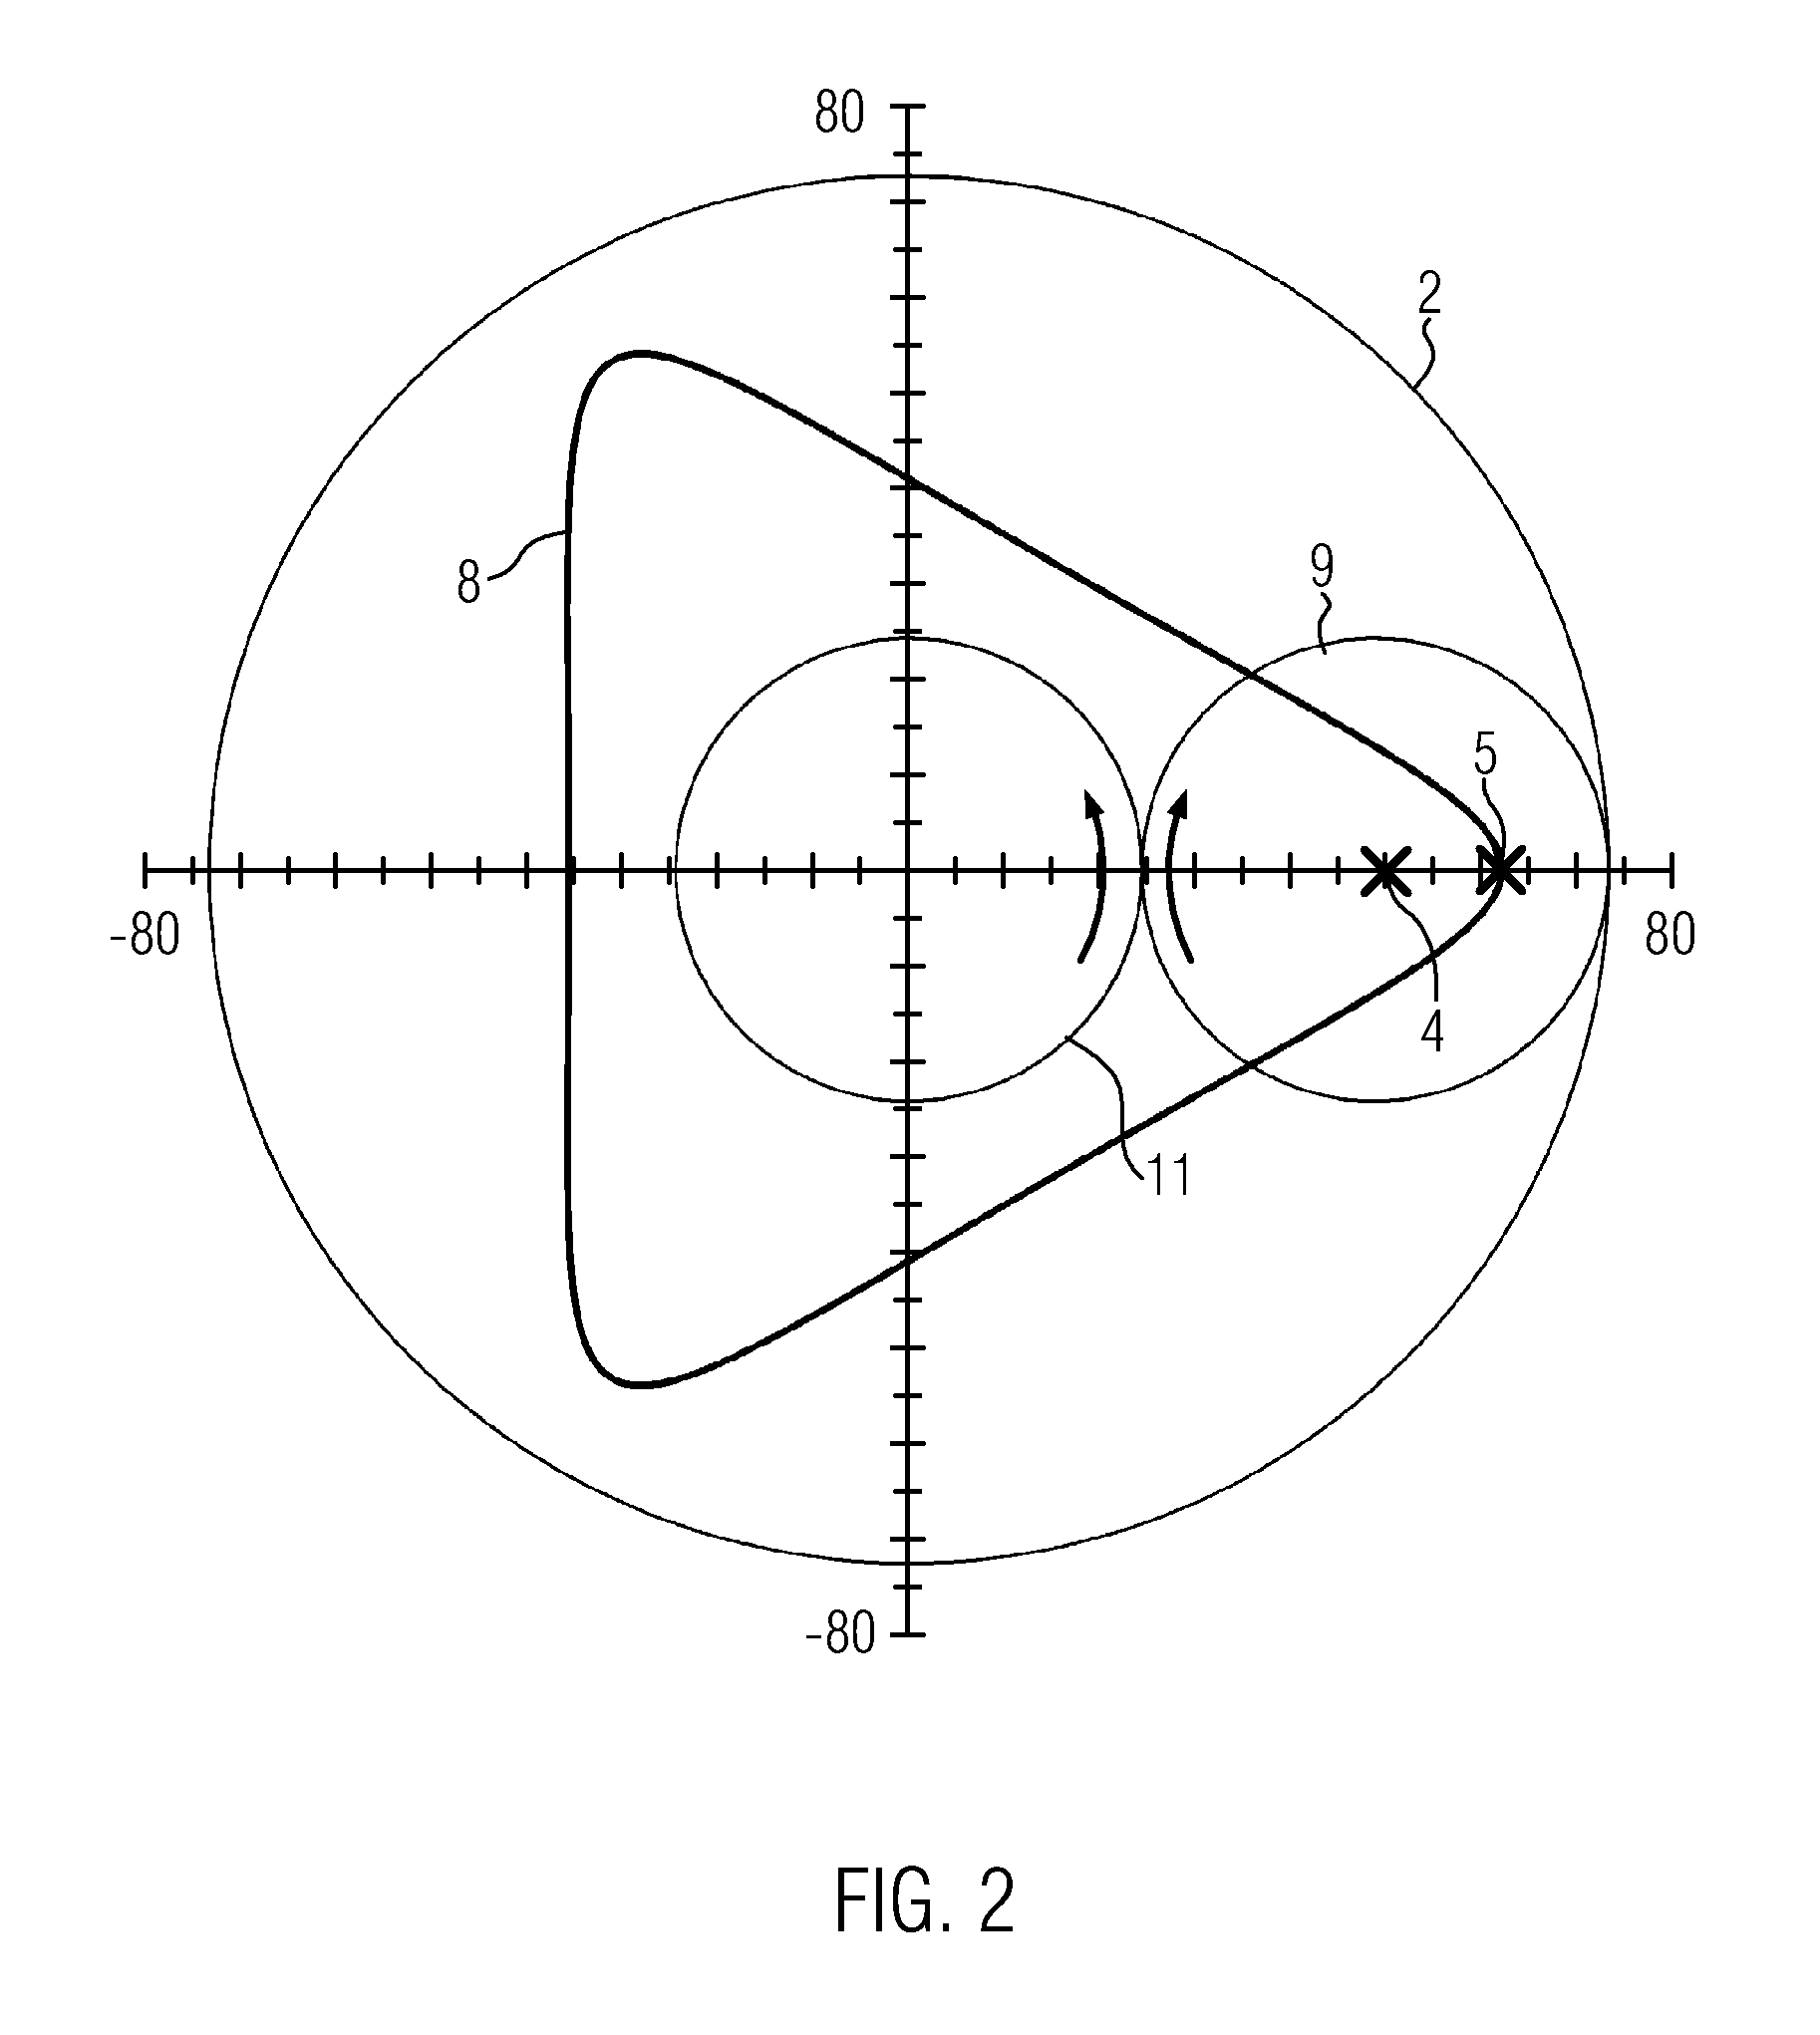 Reduction gearing with a high reduction ratio